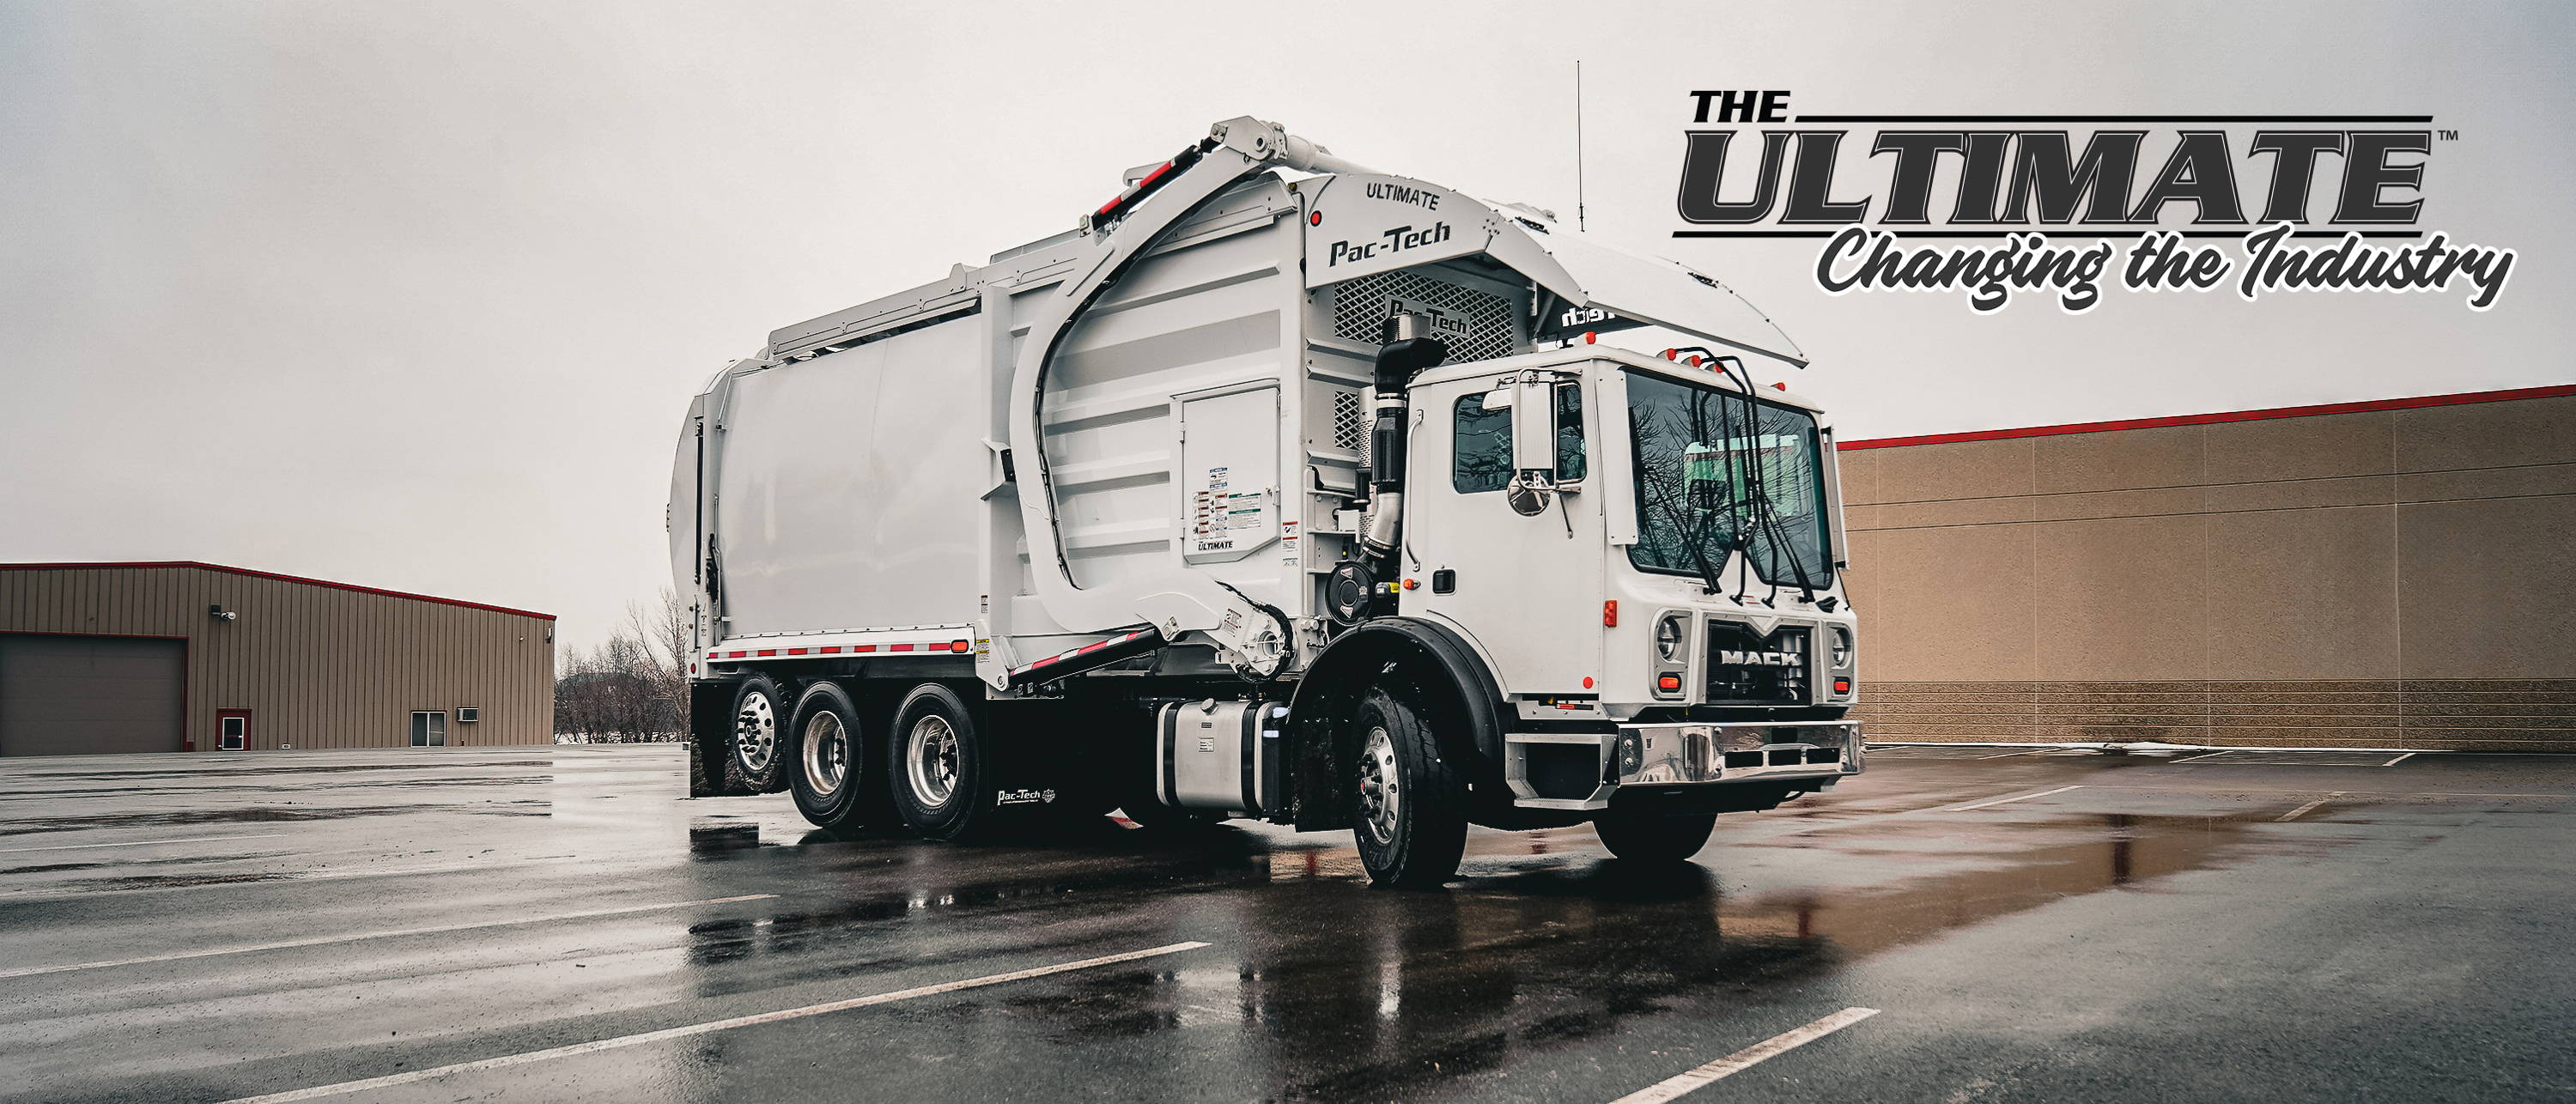 The Ultimate Front Loader Refuse Garbage Truck